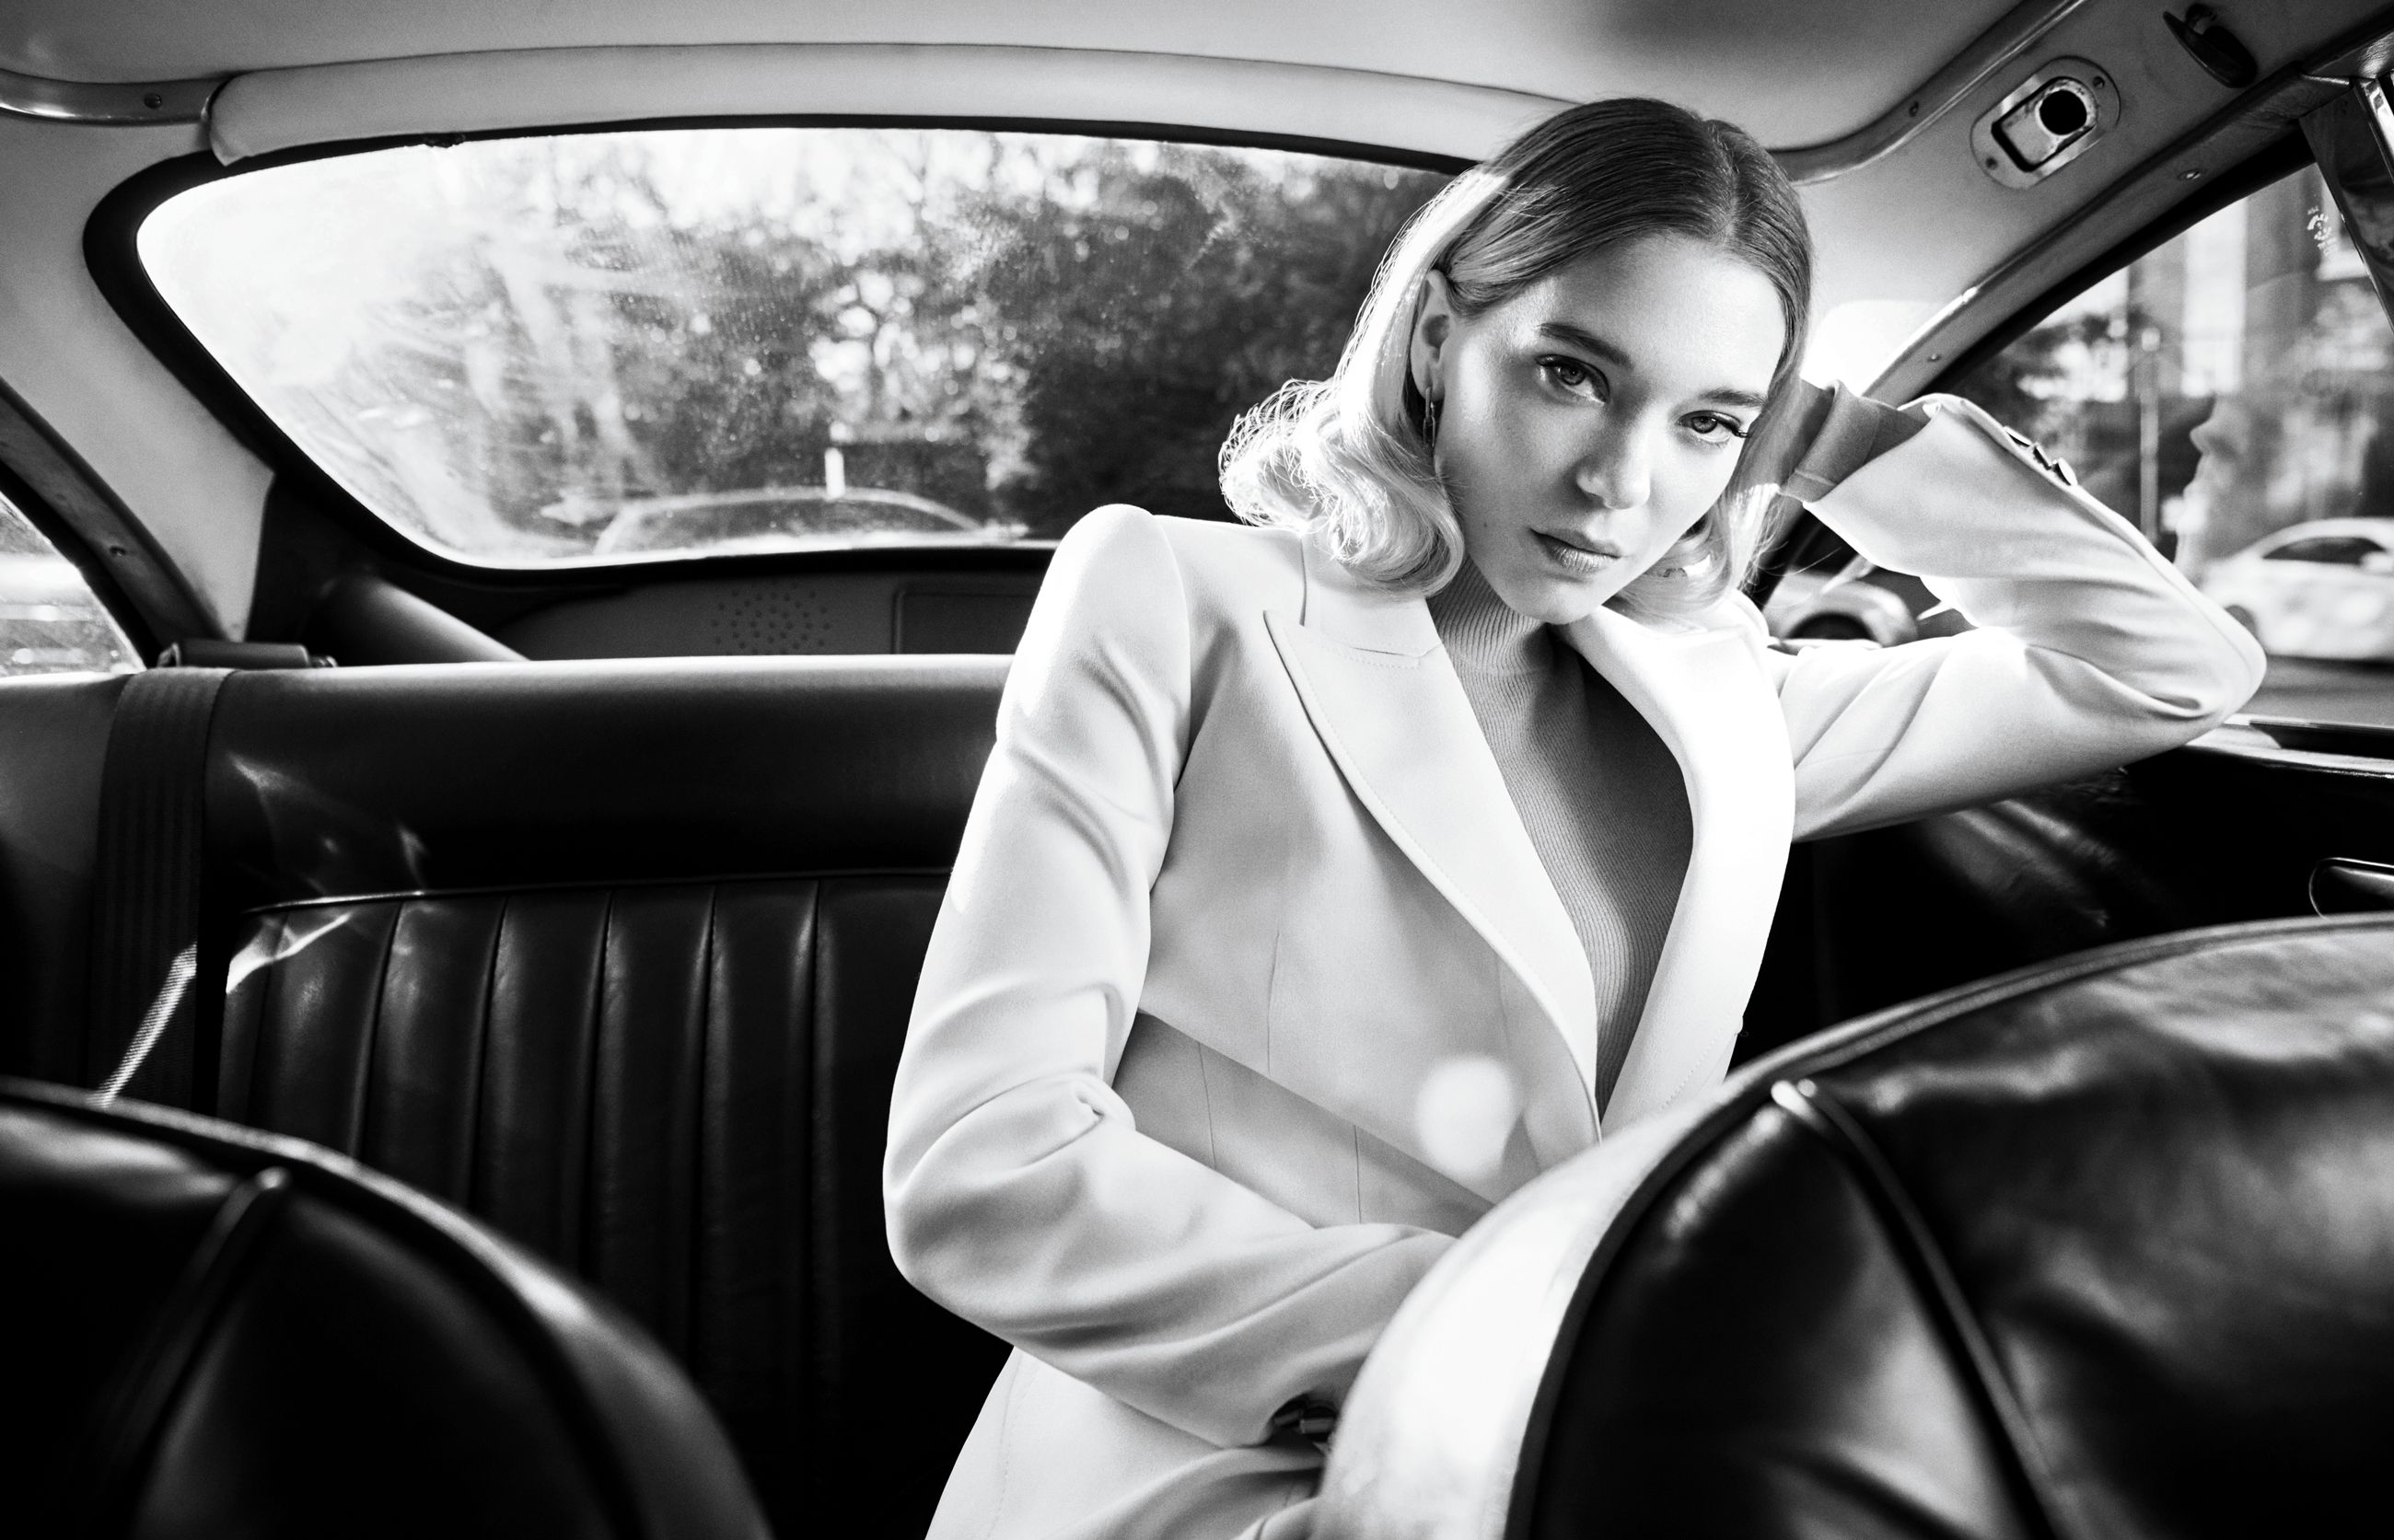 Camille Seydoux, Stylist and Sister of Léa, Gives the Bond Girl a